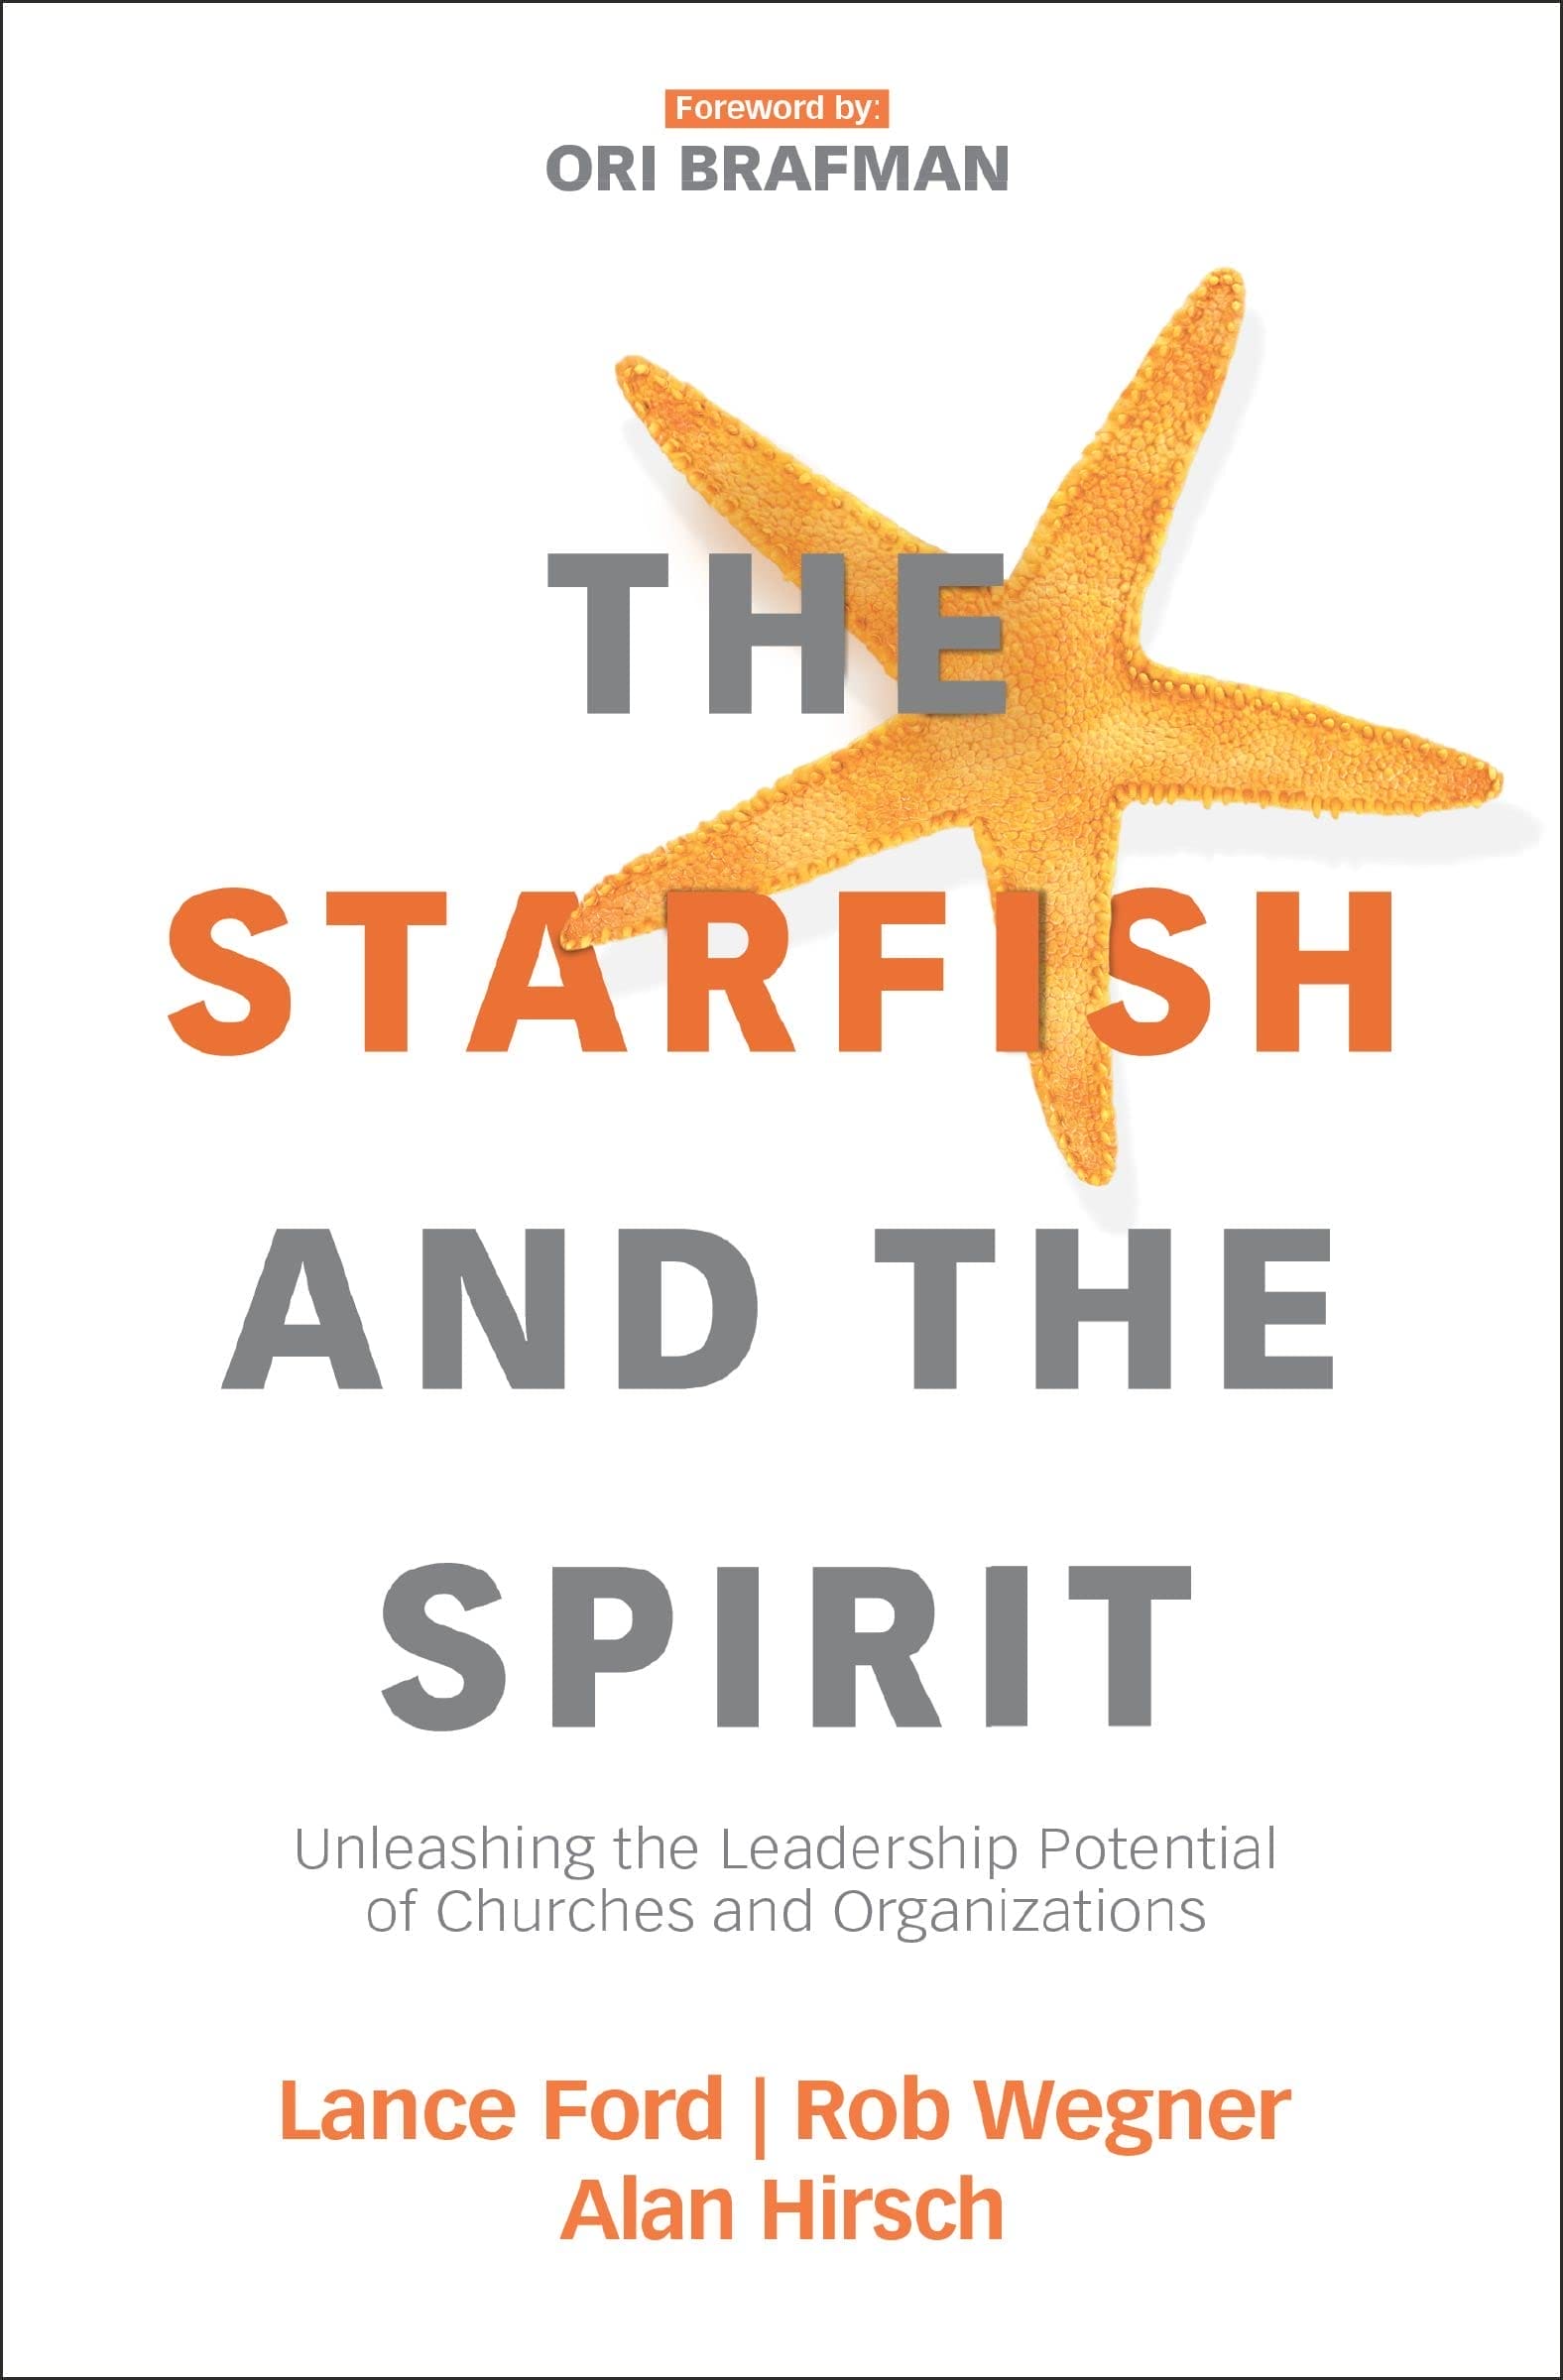 Review: The starfish and the spirit demonstrate a magnificent unity in their connection.